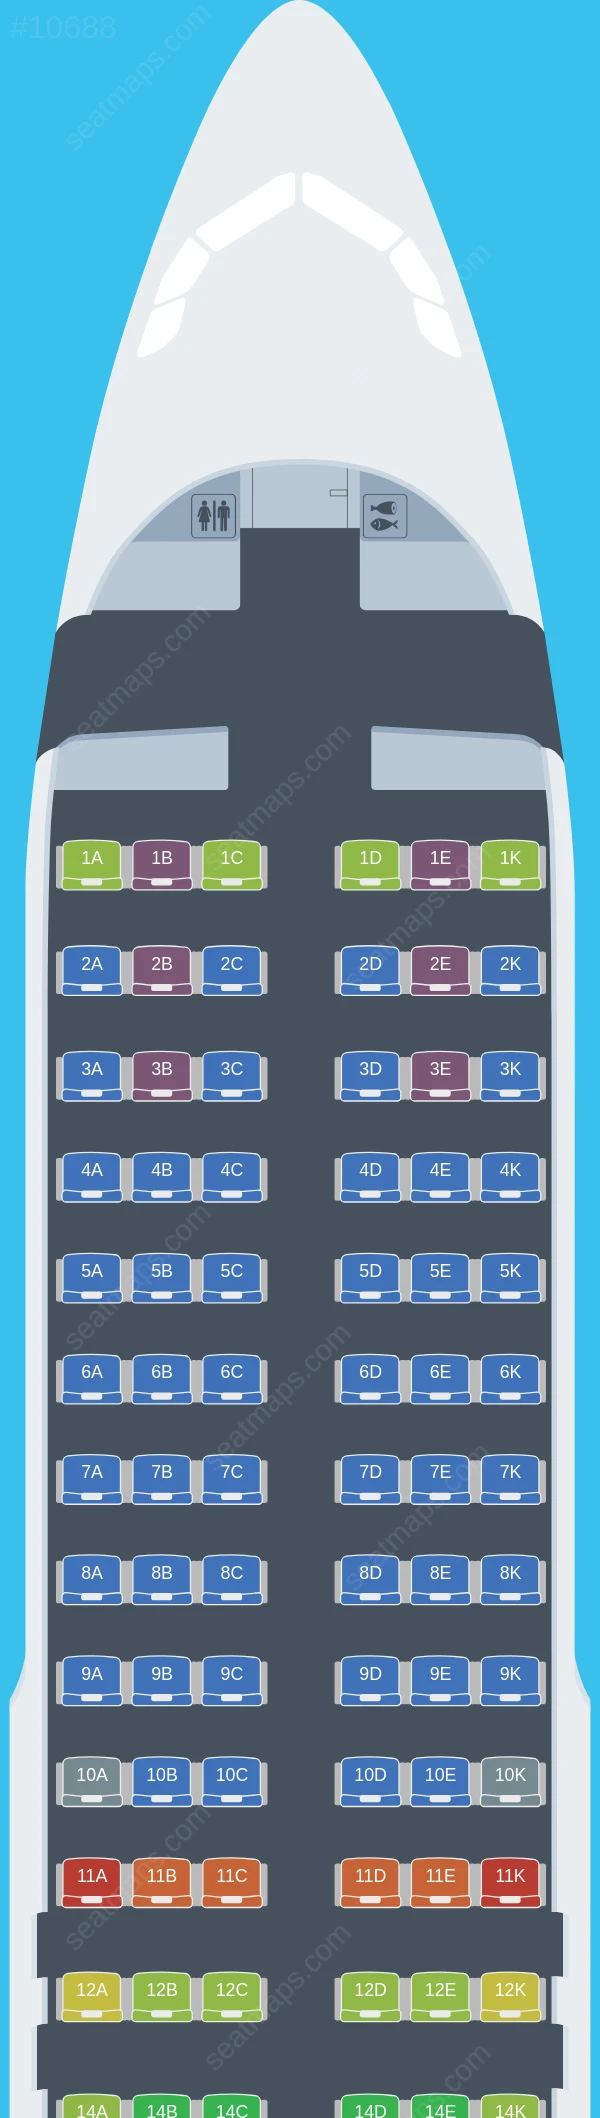 Avianca Airbus A320-200 V.1 seatmap preview